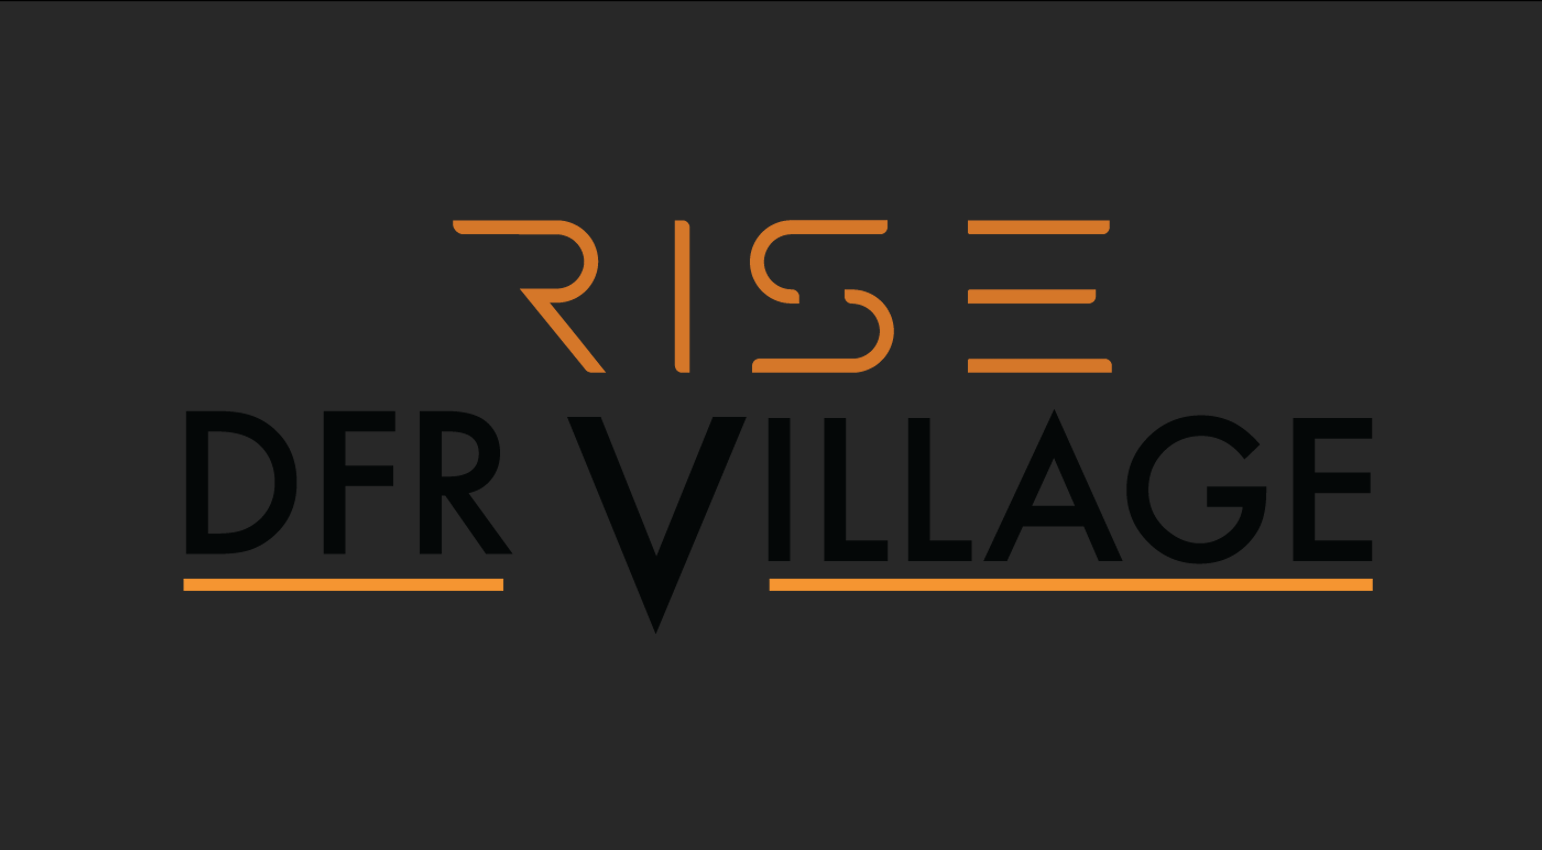 Skyfire Consulting Unveils Rise DFR Village Training and Test Site for Drone First Responders